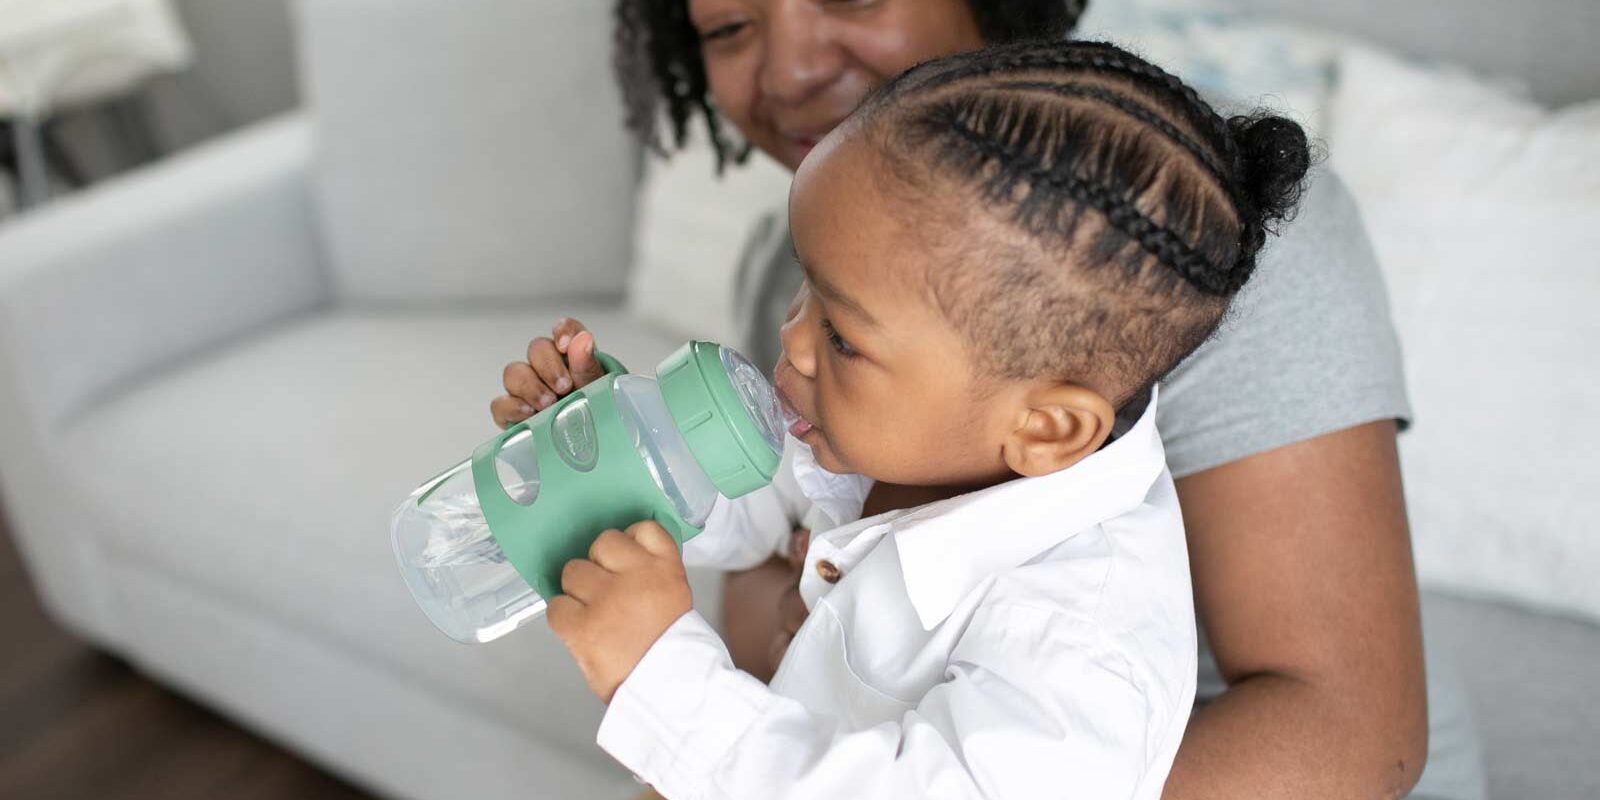 From Bottle to Cup: Helping Your Child Make a Healthy Transition 